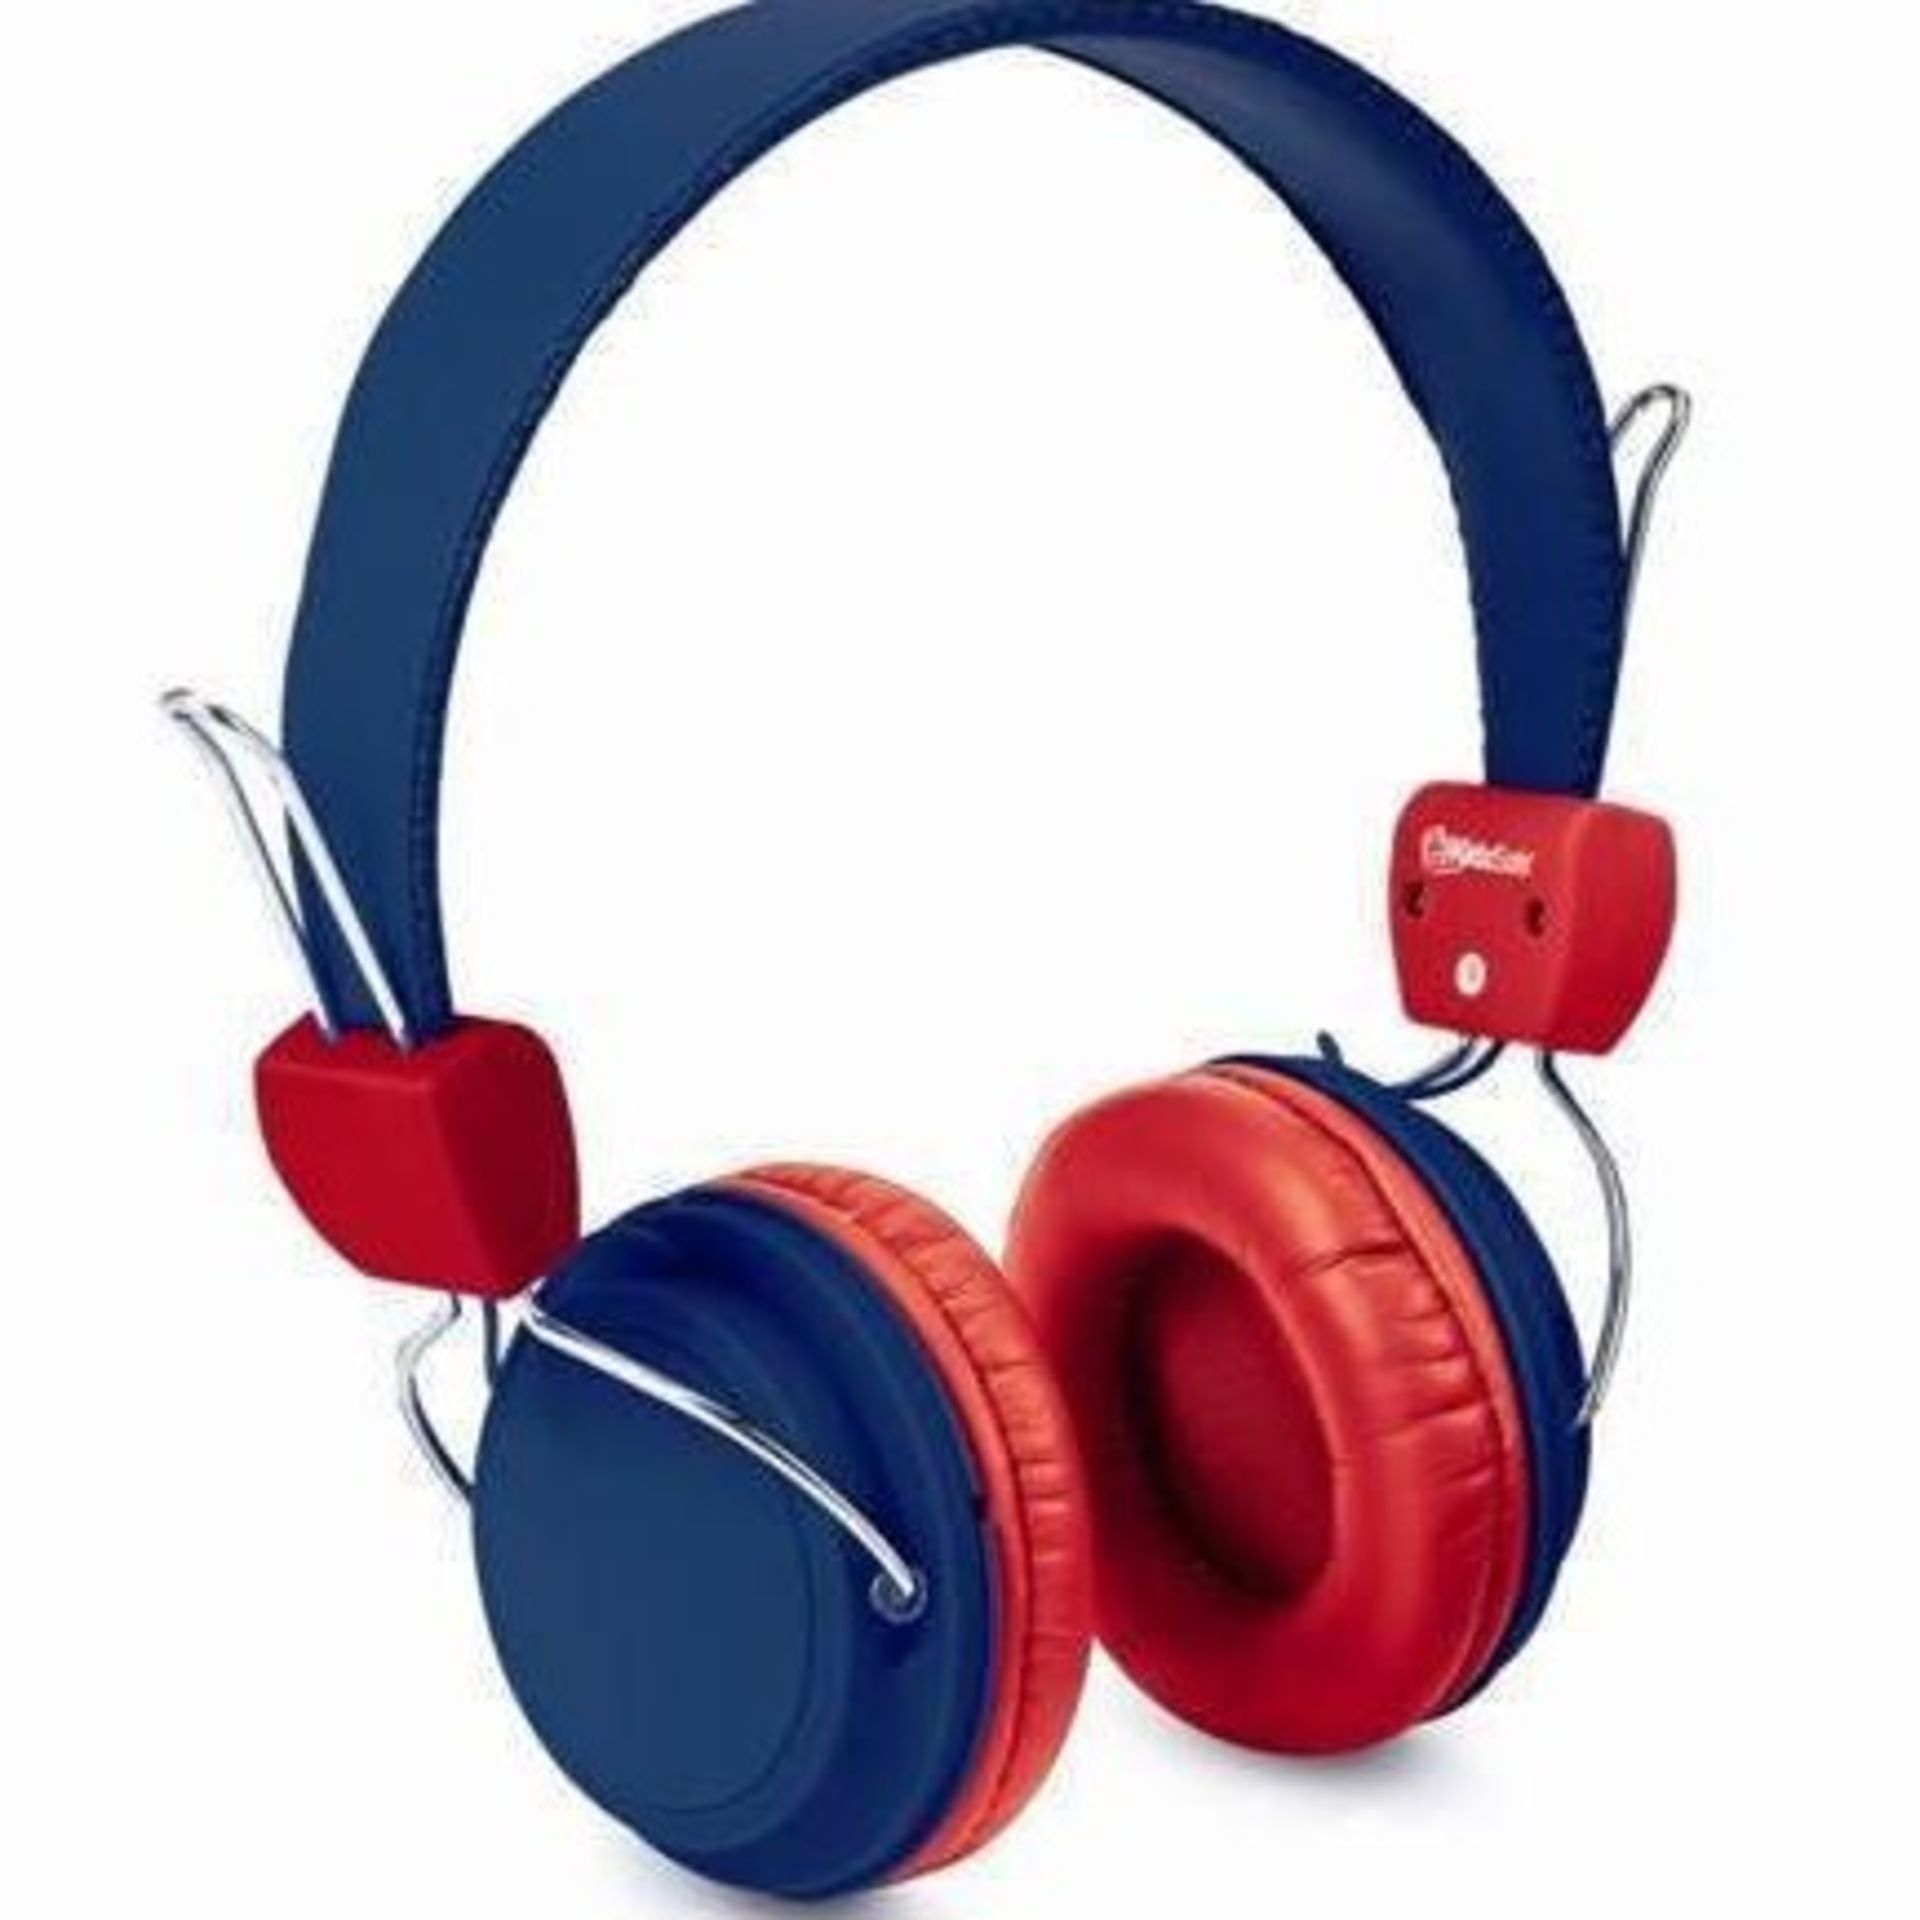 + VAT Brand New KidzSafe Wired Headphones by SMS Audio - Amazon £29.81 - Ebay £24.99 - with Over 50